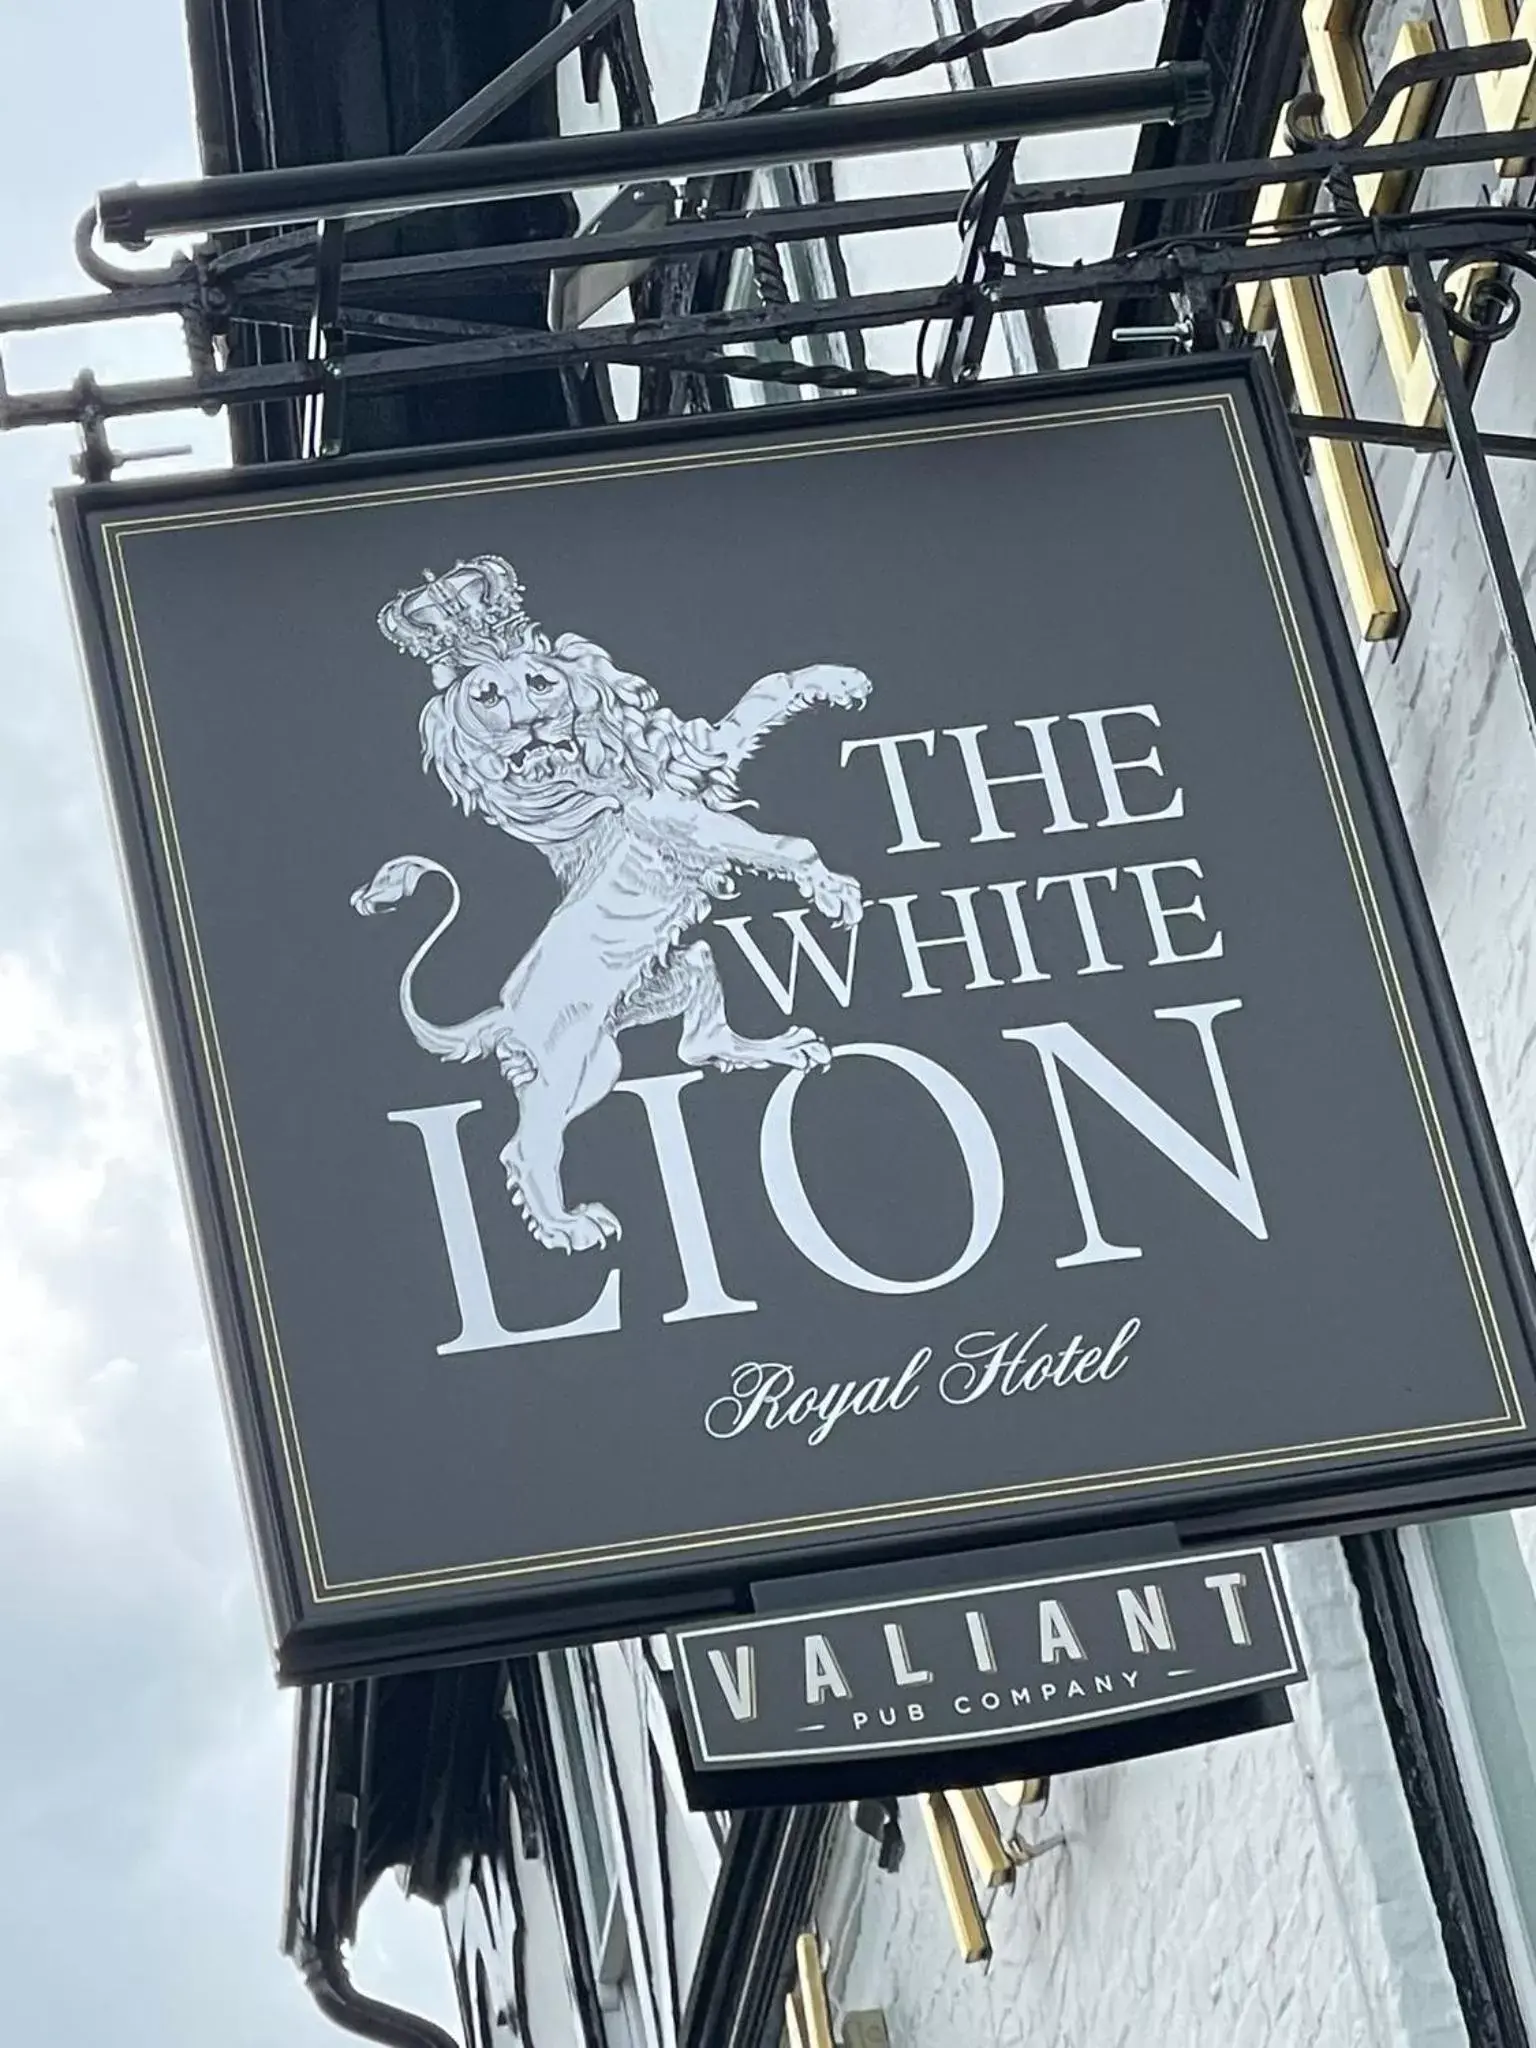 Property Logo/Sign in White Lion Royal Hotel